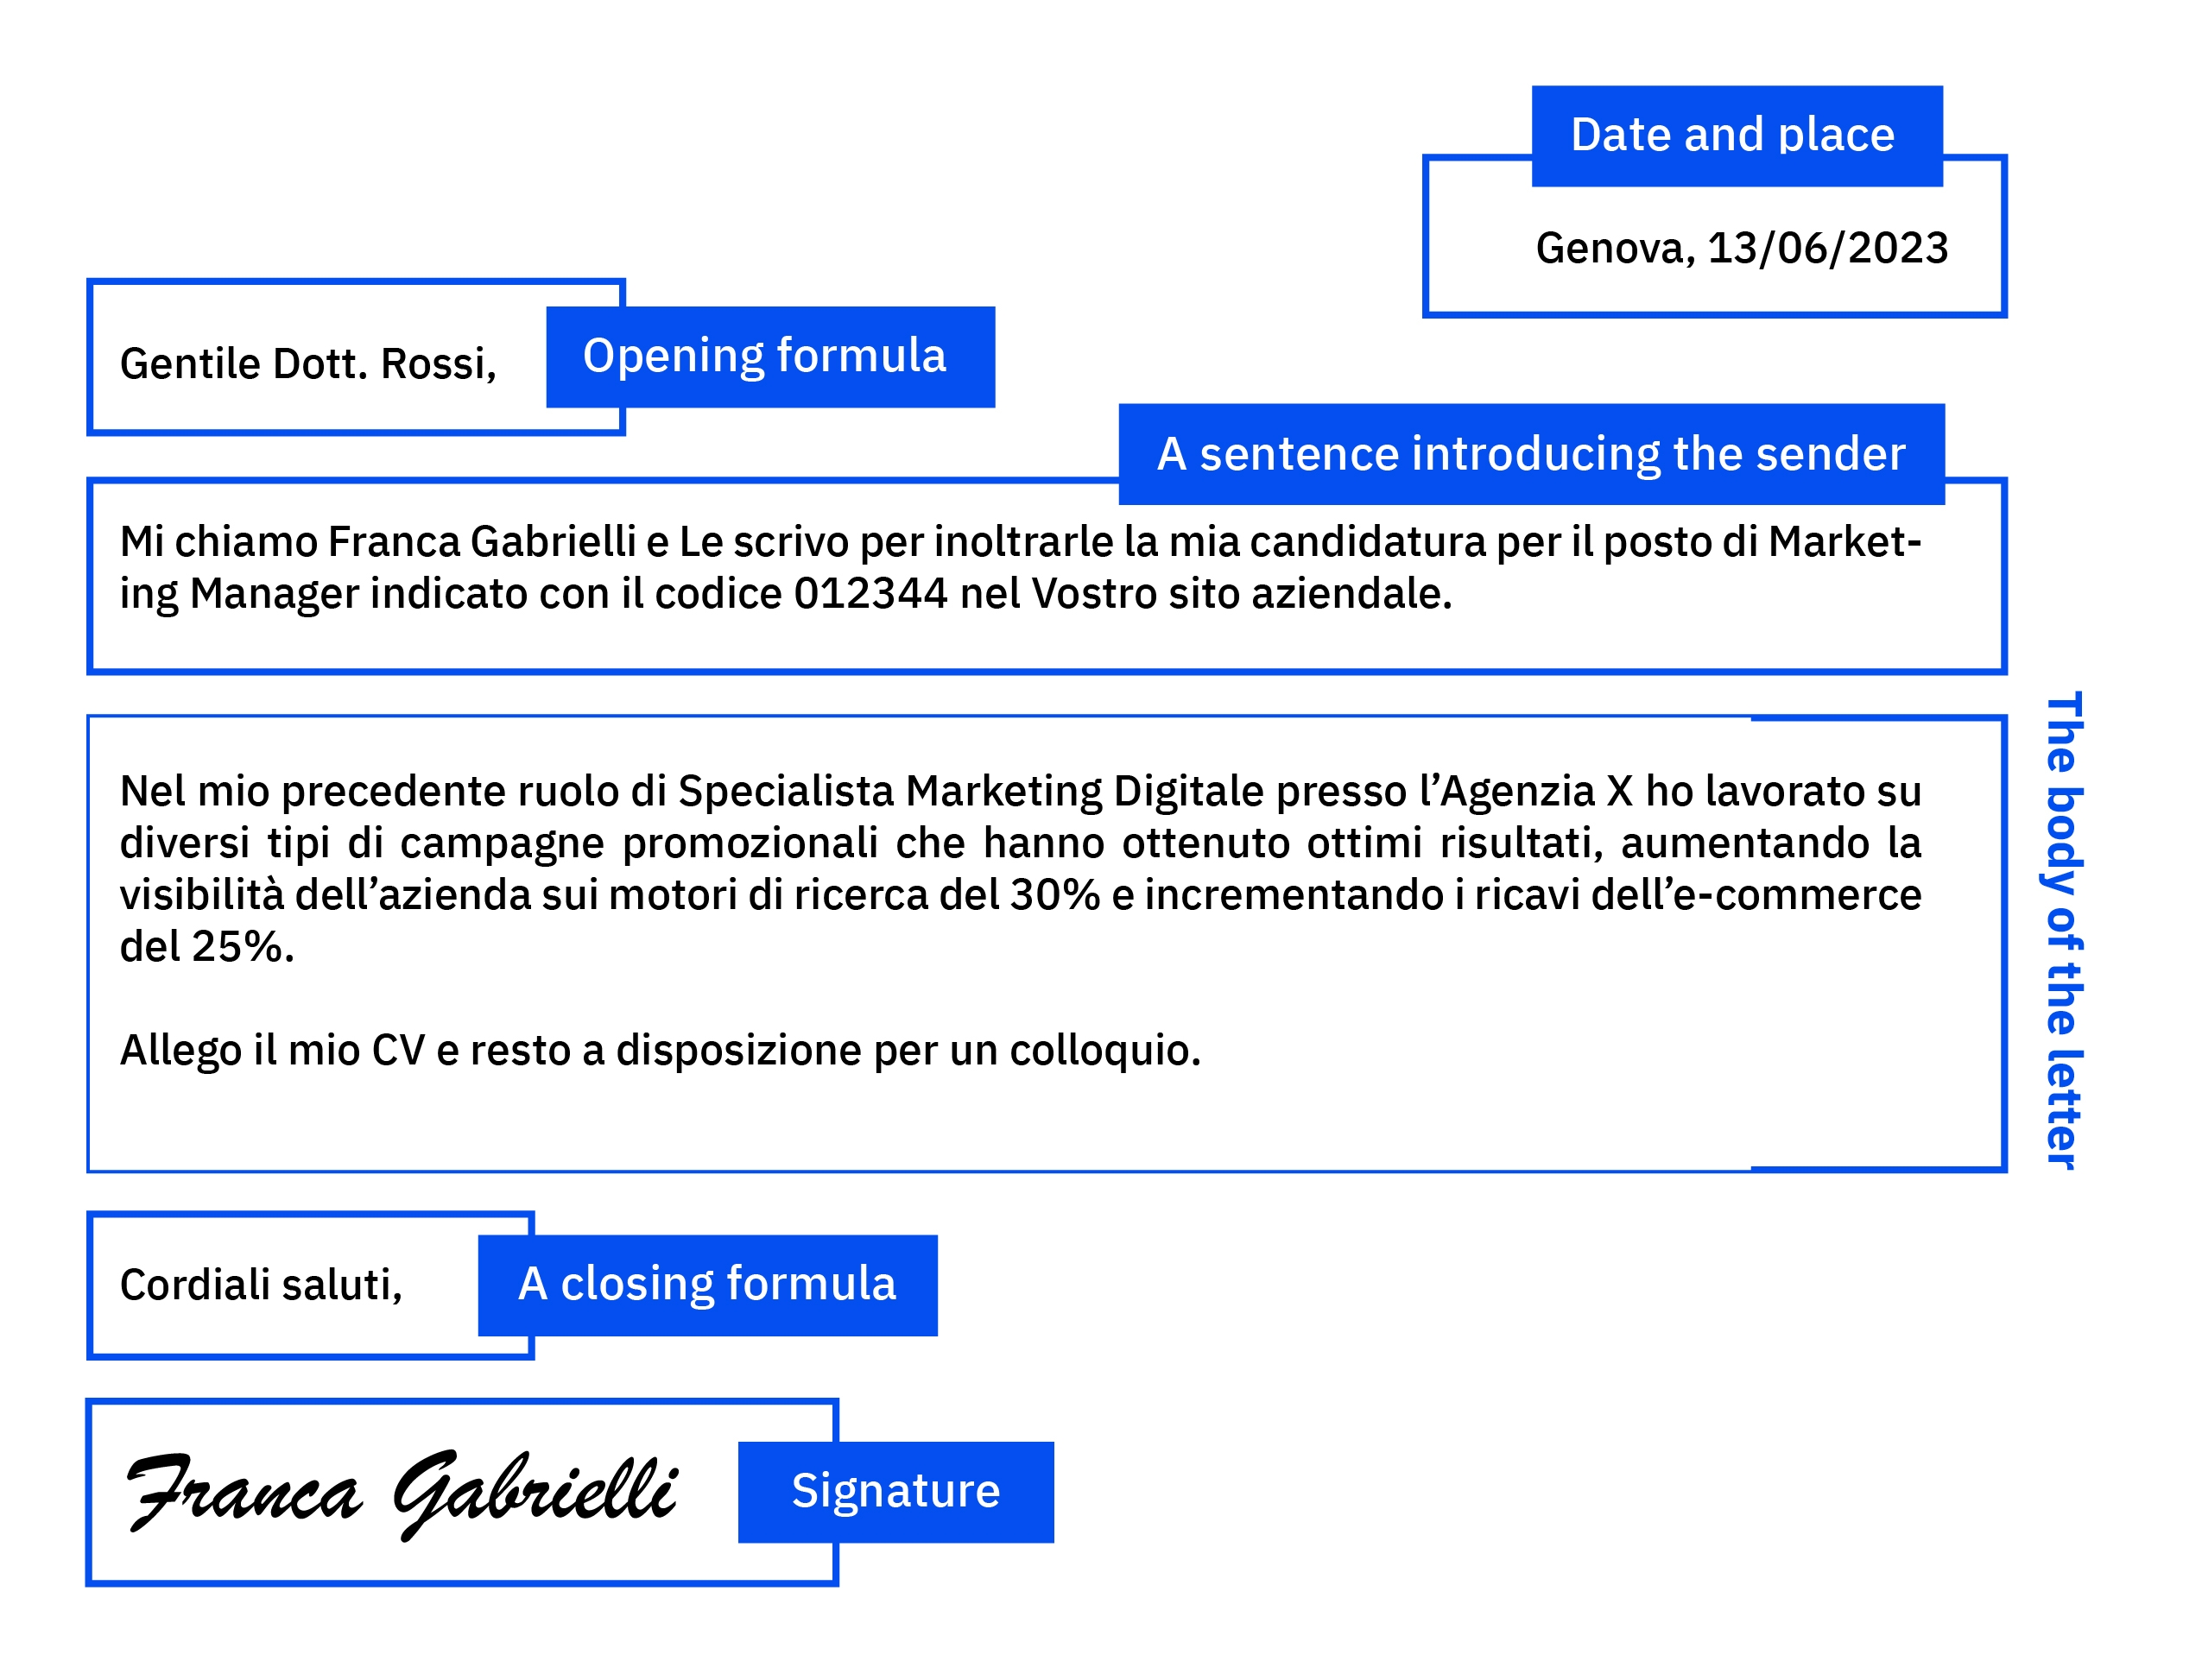 How to write and format a letter in Italian.